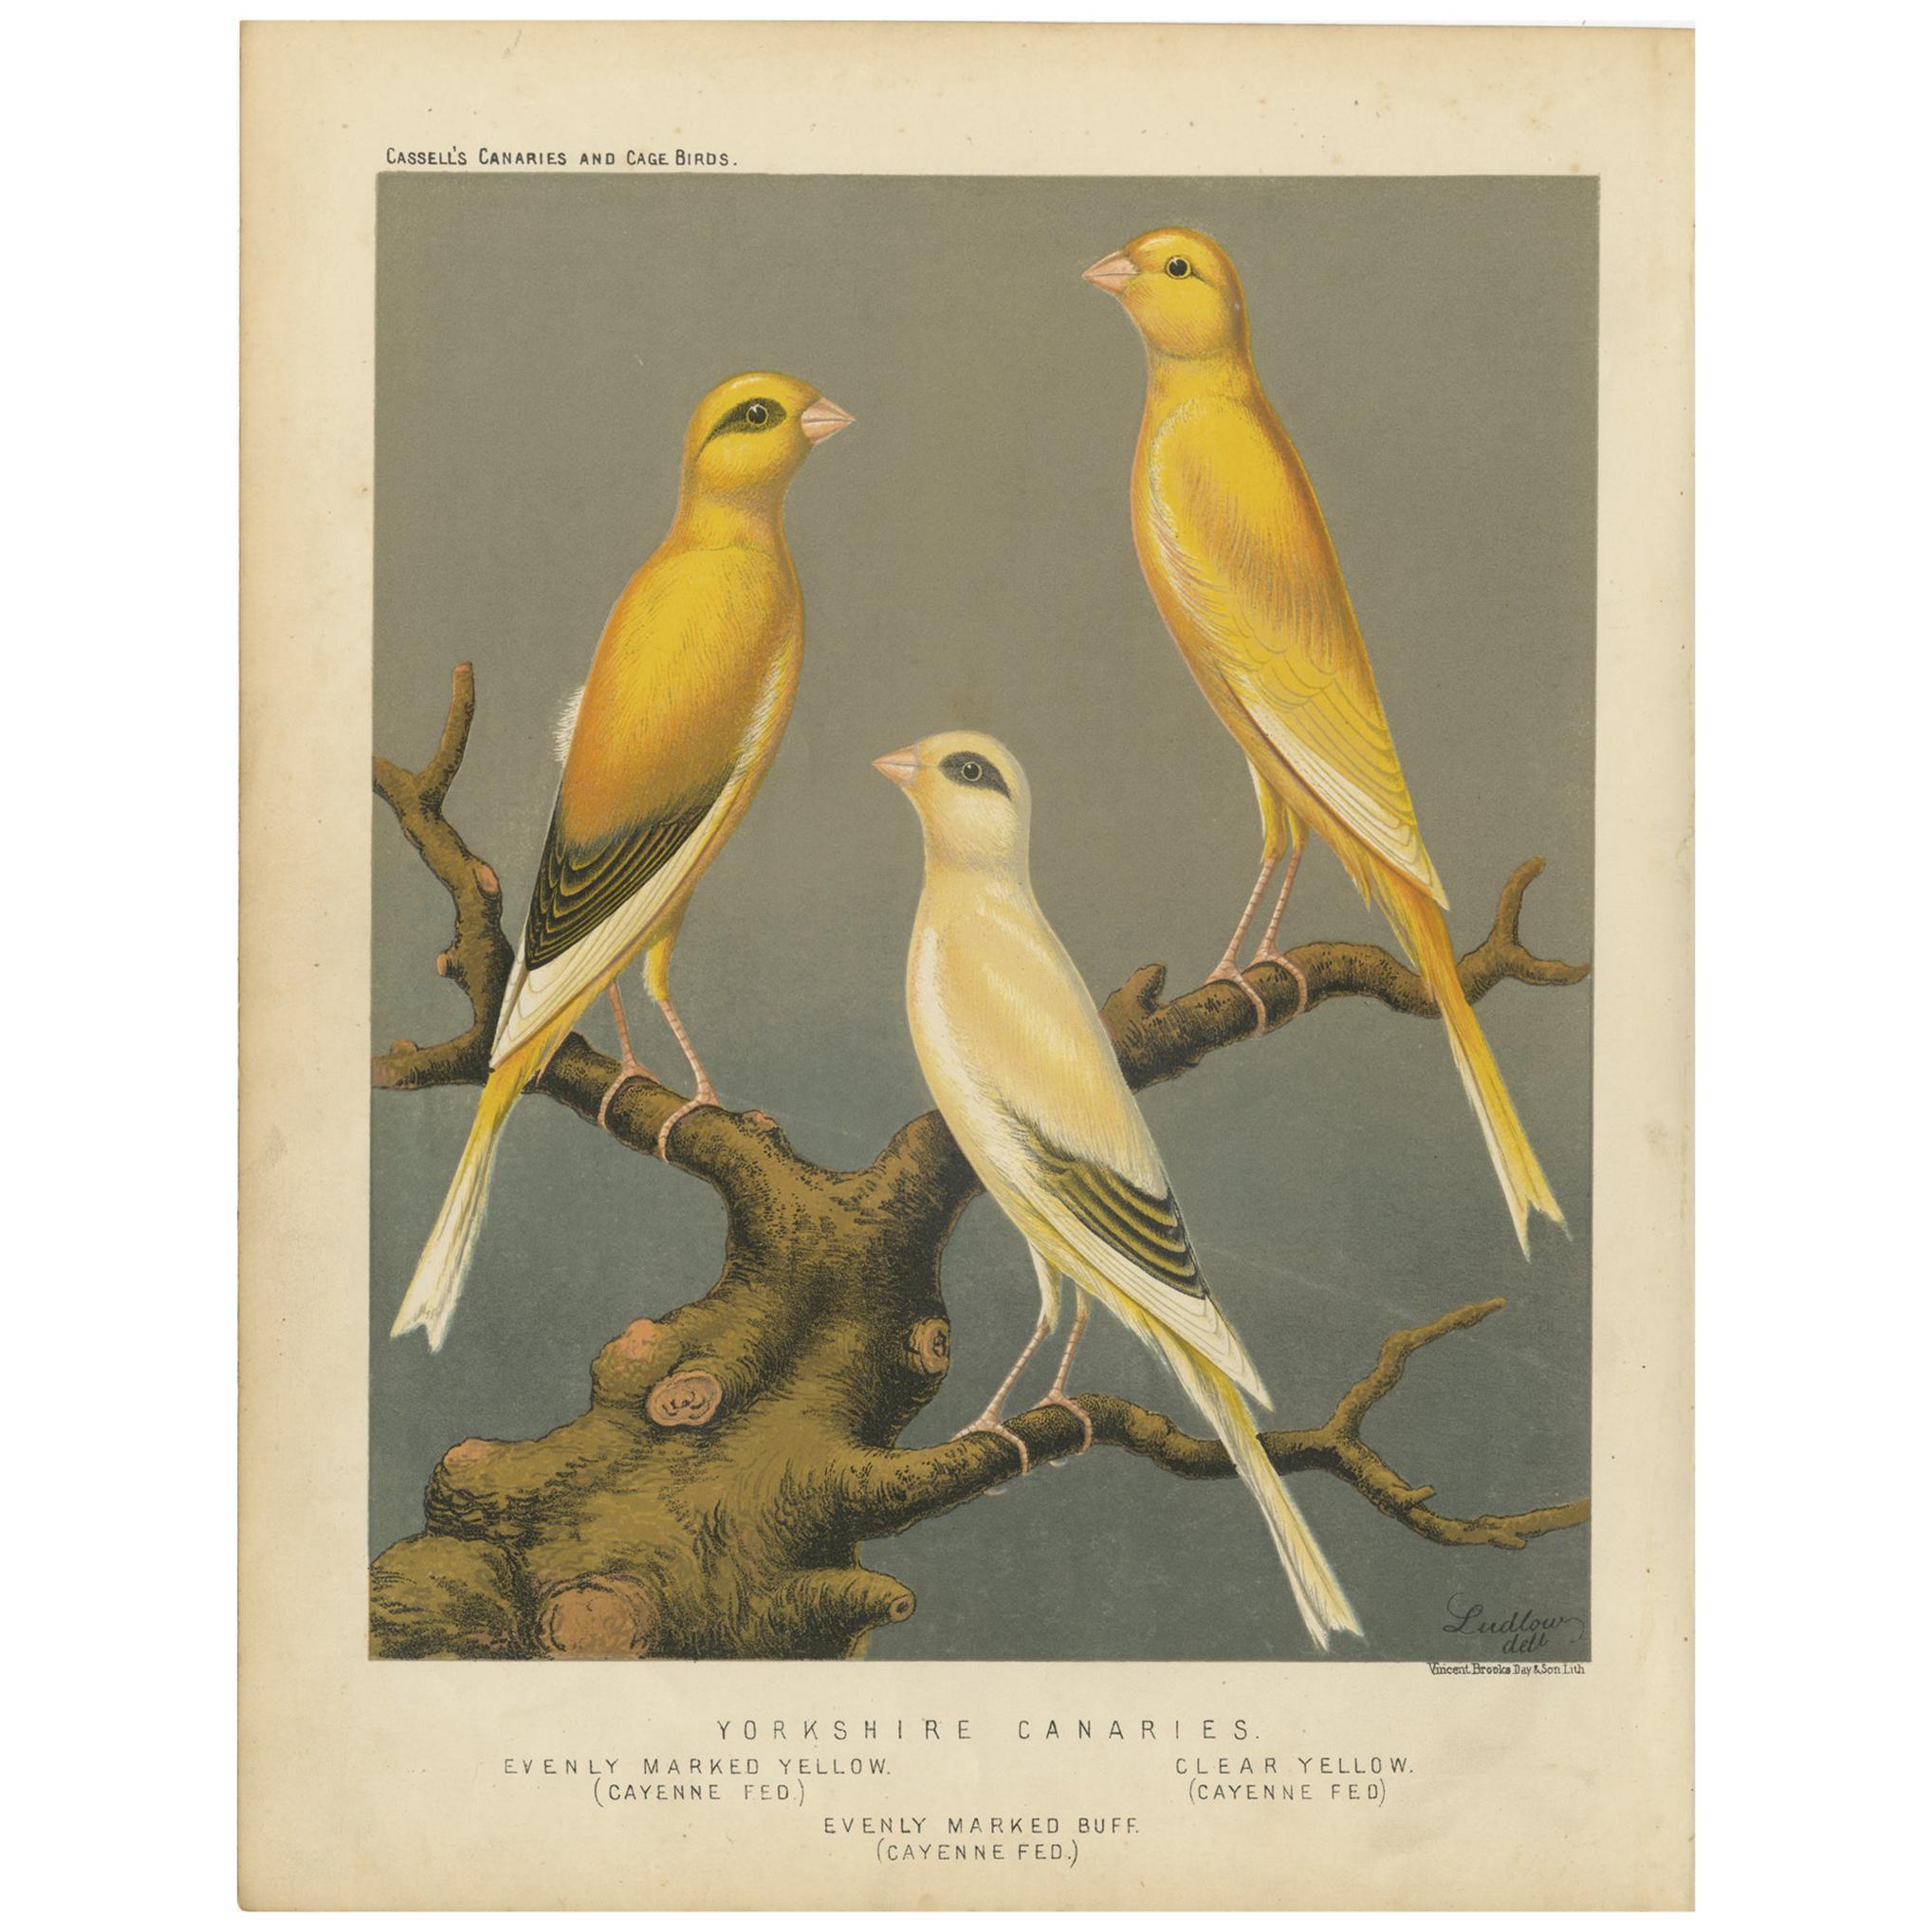 Antique Bird Print of the Yorkshire Canaries Evenly Marked Yellow and Others